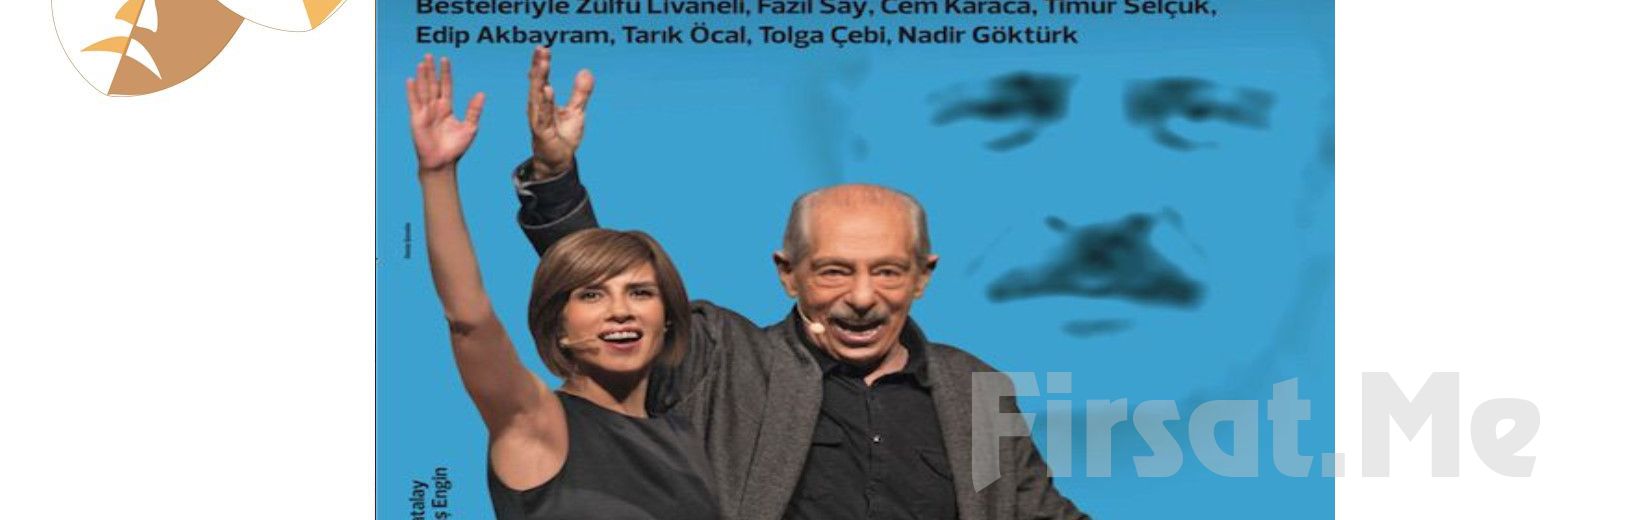 Entrance Ticket to Genco Erkal's Musical Theater Play 'About Living' About Nazım Hikmet